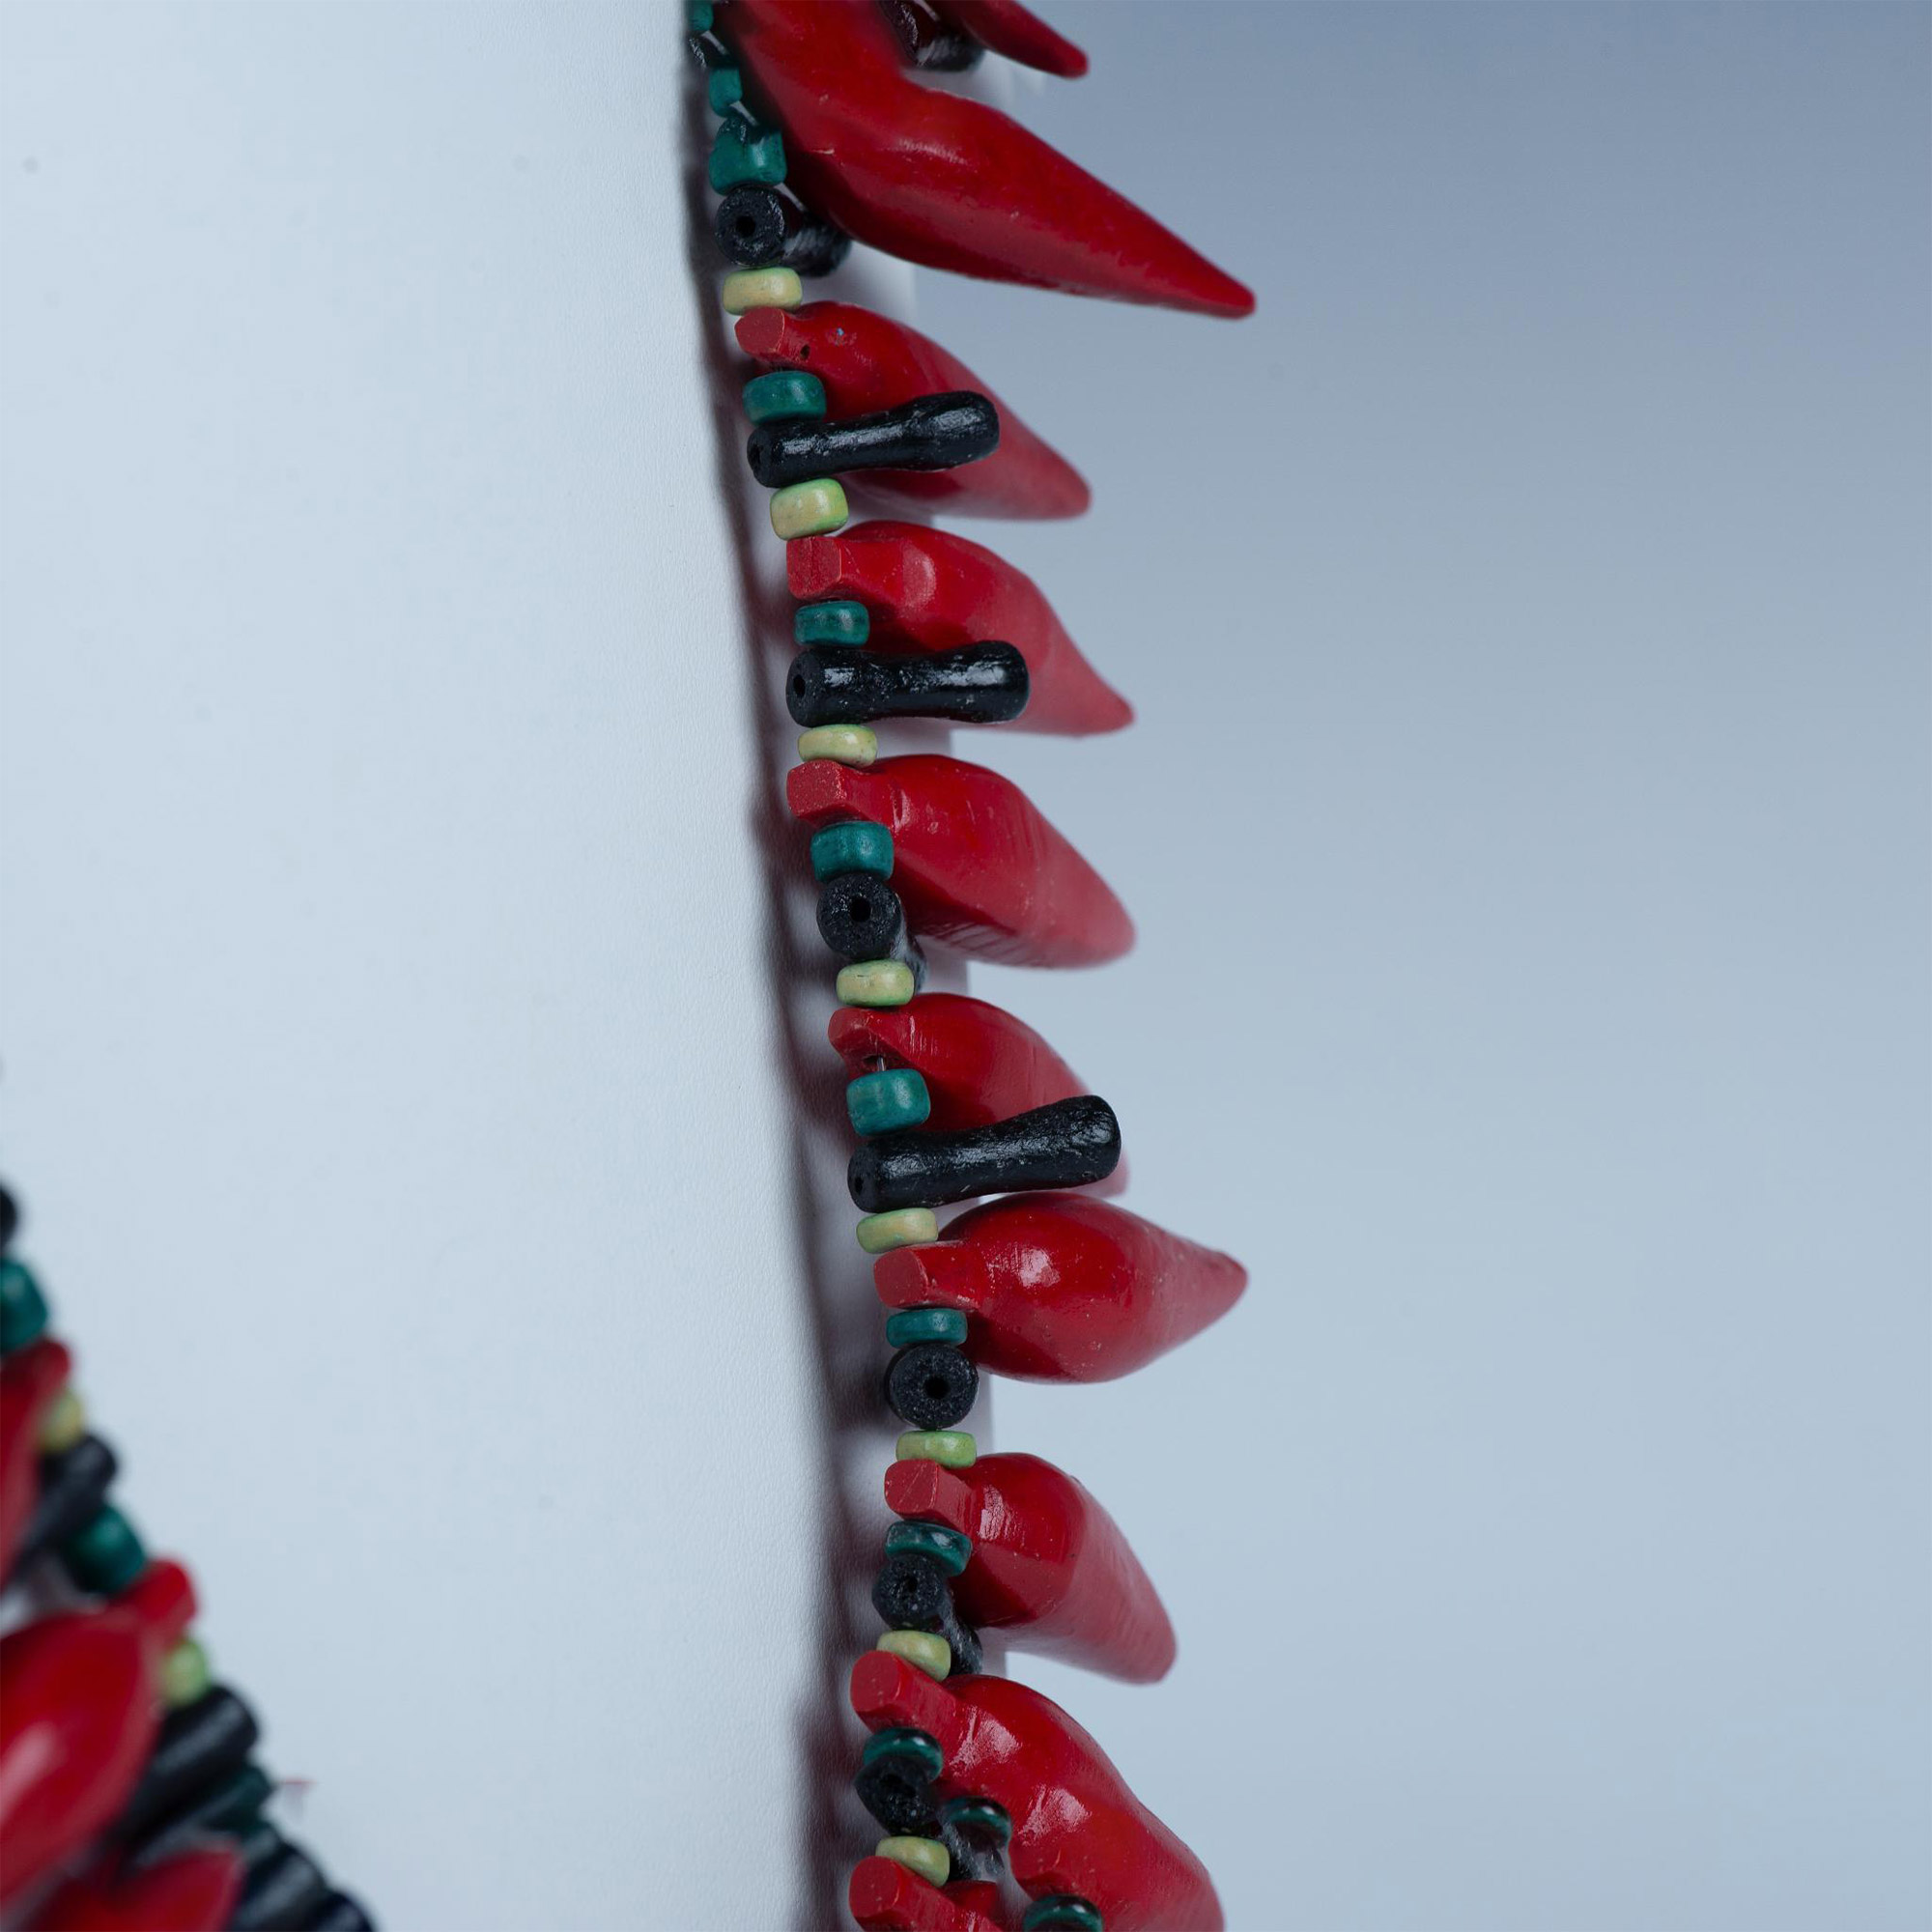 Retro Wood Red Chili Pepper Necklace - Image 4 of 6